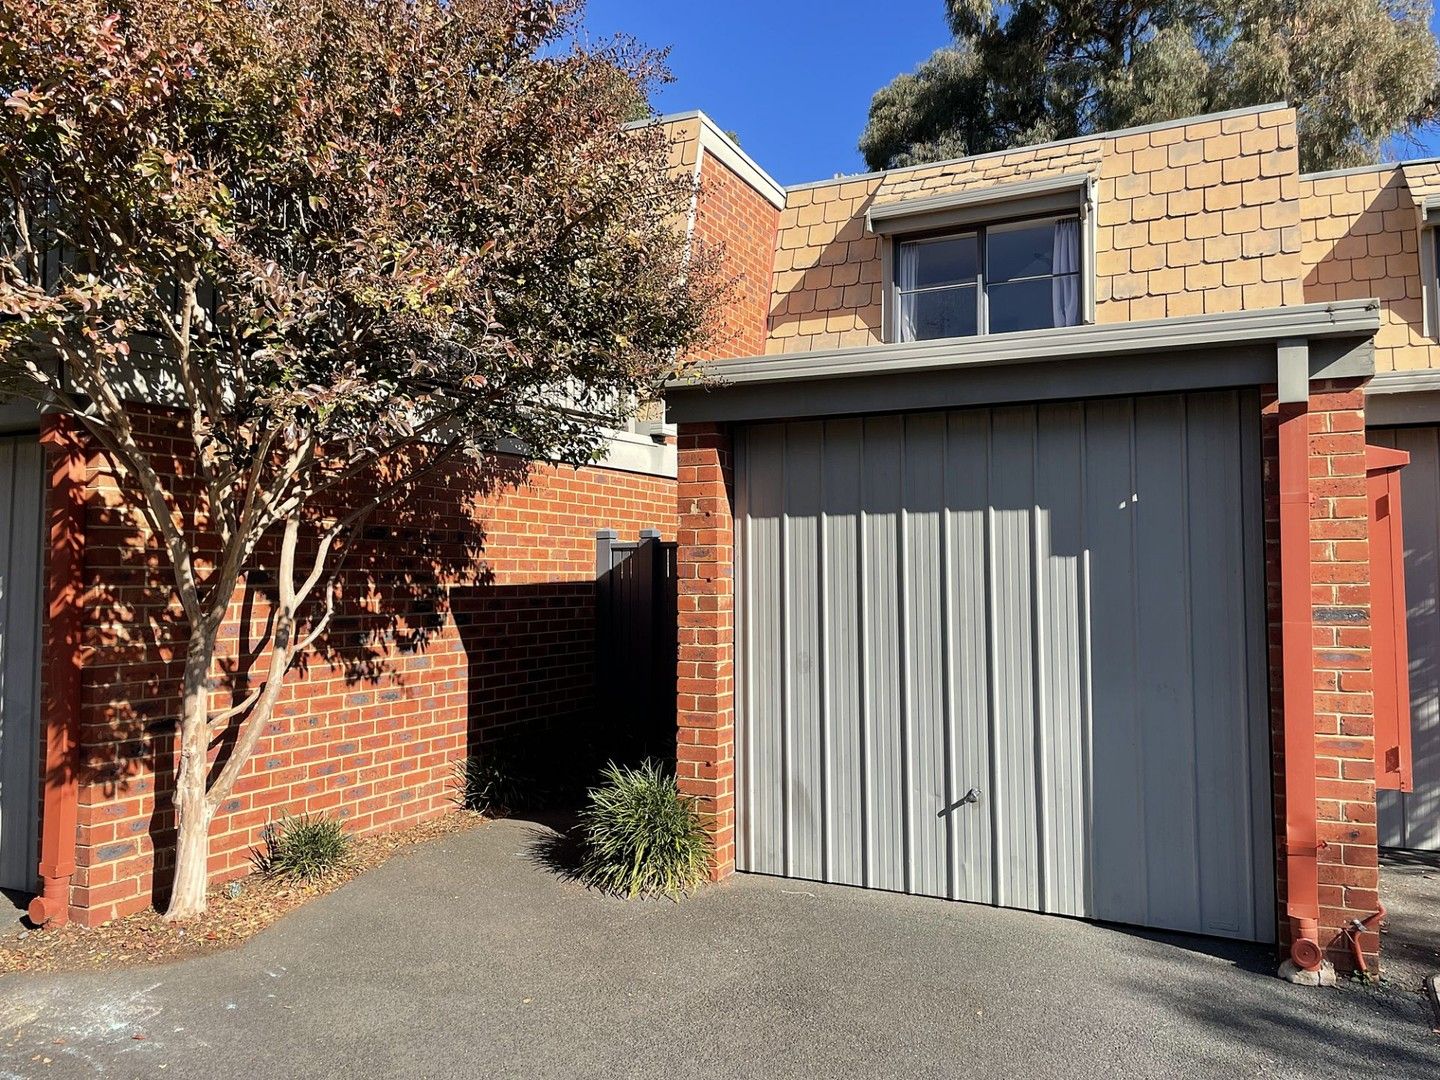 3 bedrooms Townhouse in 11/16-20 Milton St ELWOOD VIC, 3184